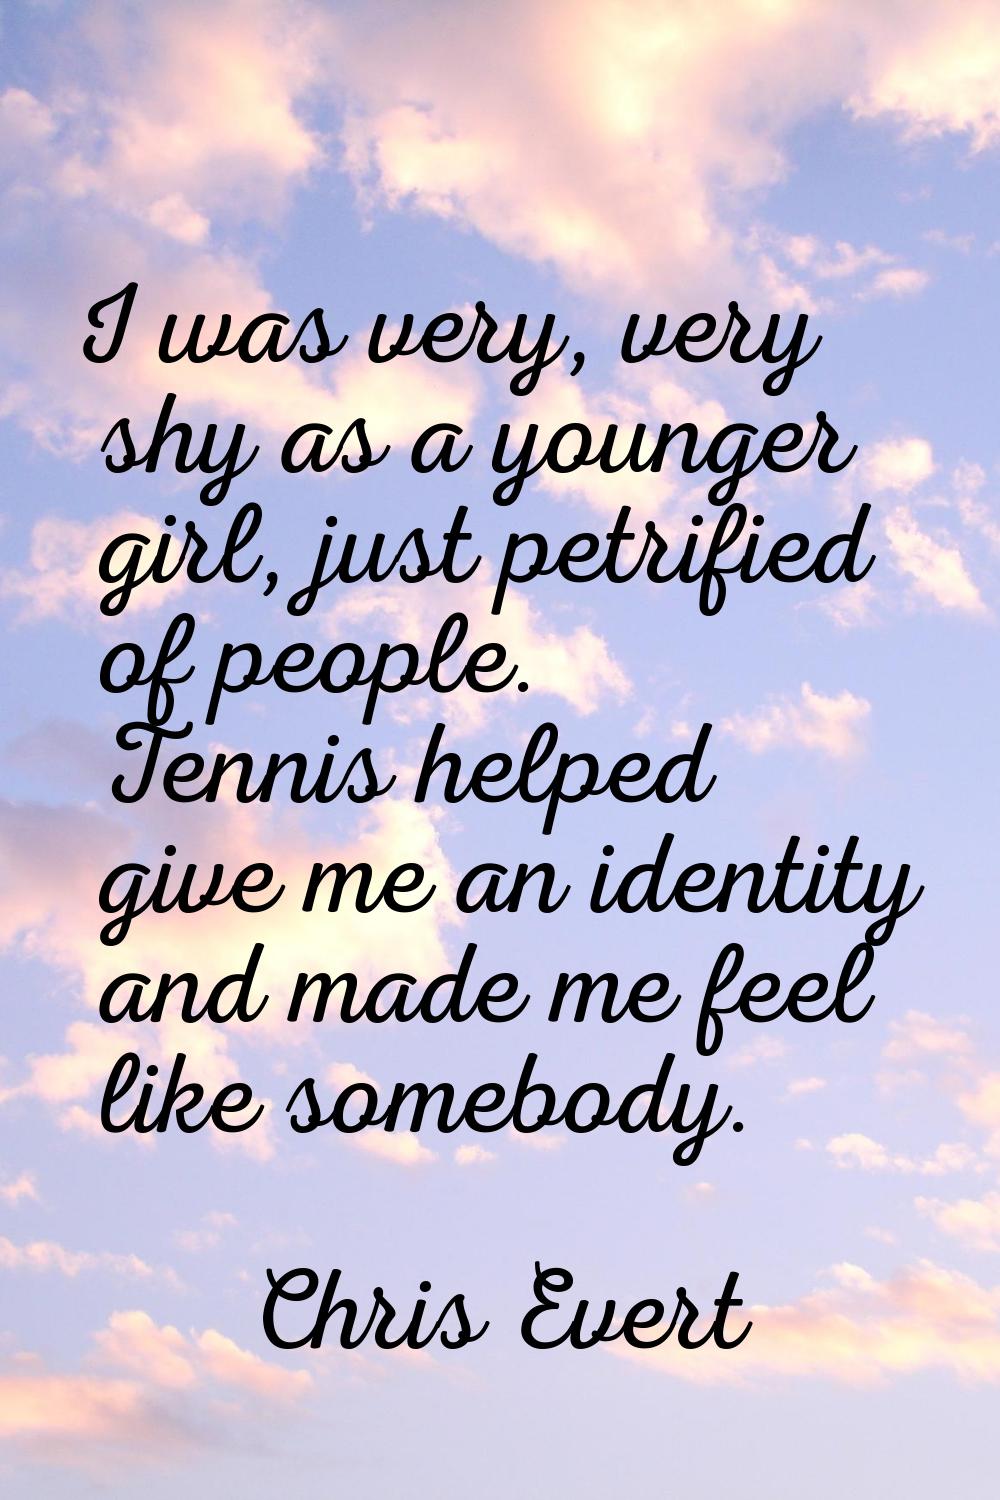 I was very, very shy as a younger girl, just petrified of people. Tennis helped give me an identity